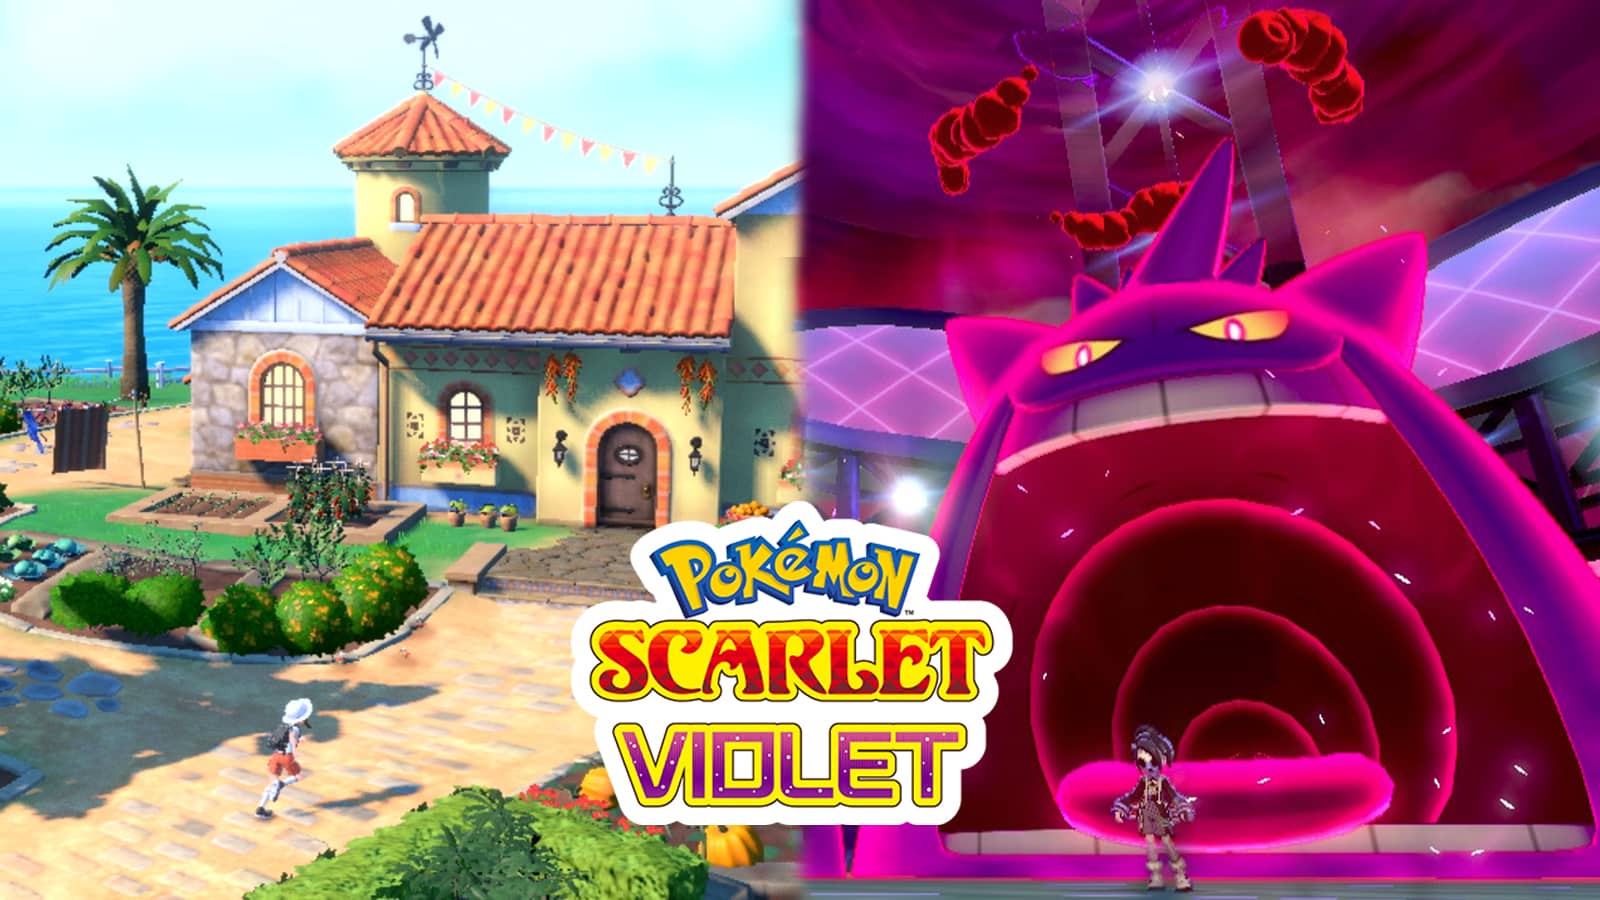 Pokemon Scarlet & Violet: First 16 Minutes of Gameplay 